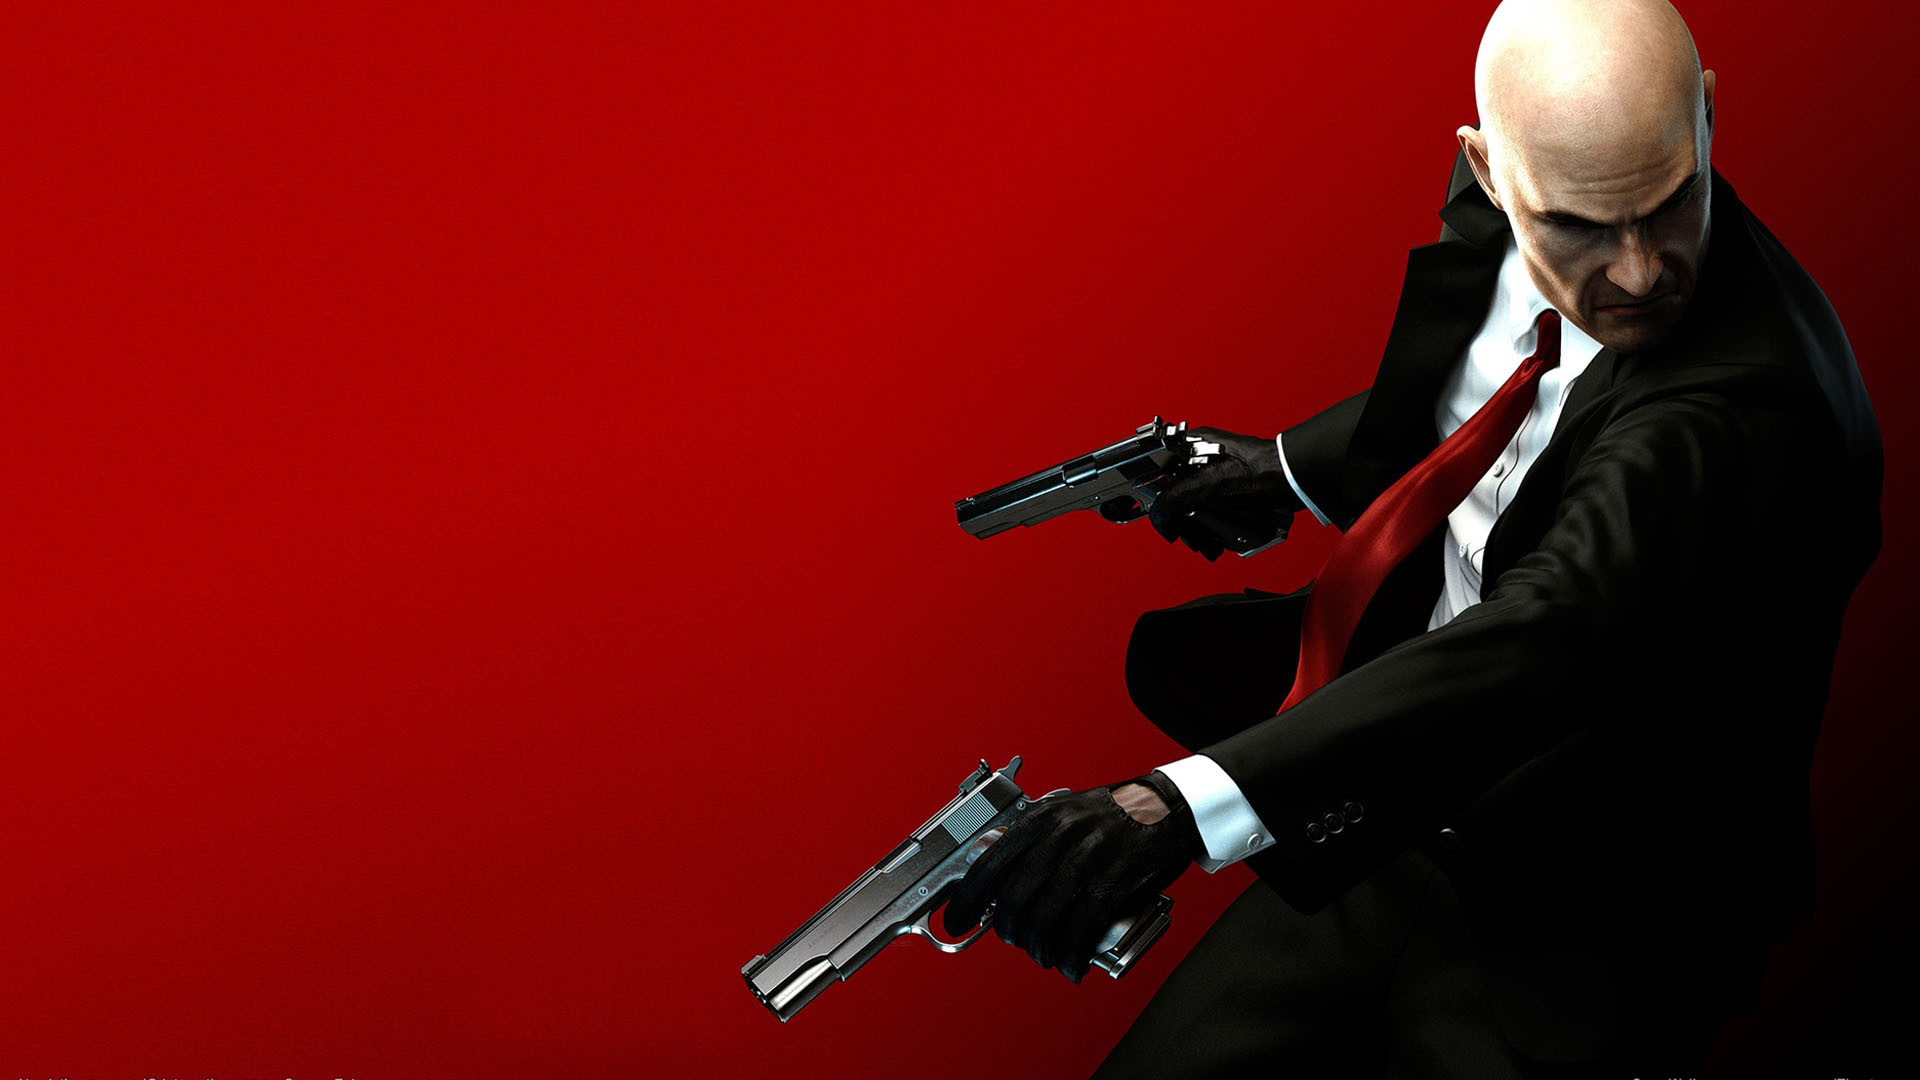 1920x1080 Games, Man, Suit, Gun, Red Background, PS4, Brand, Technology